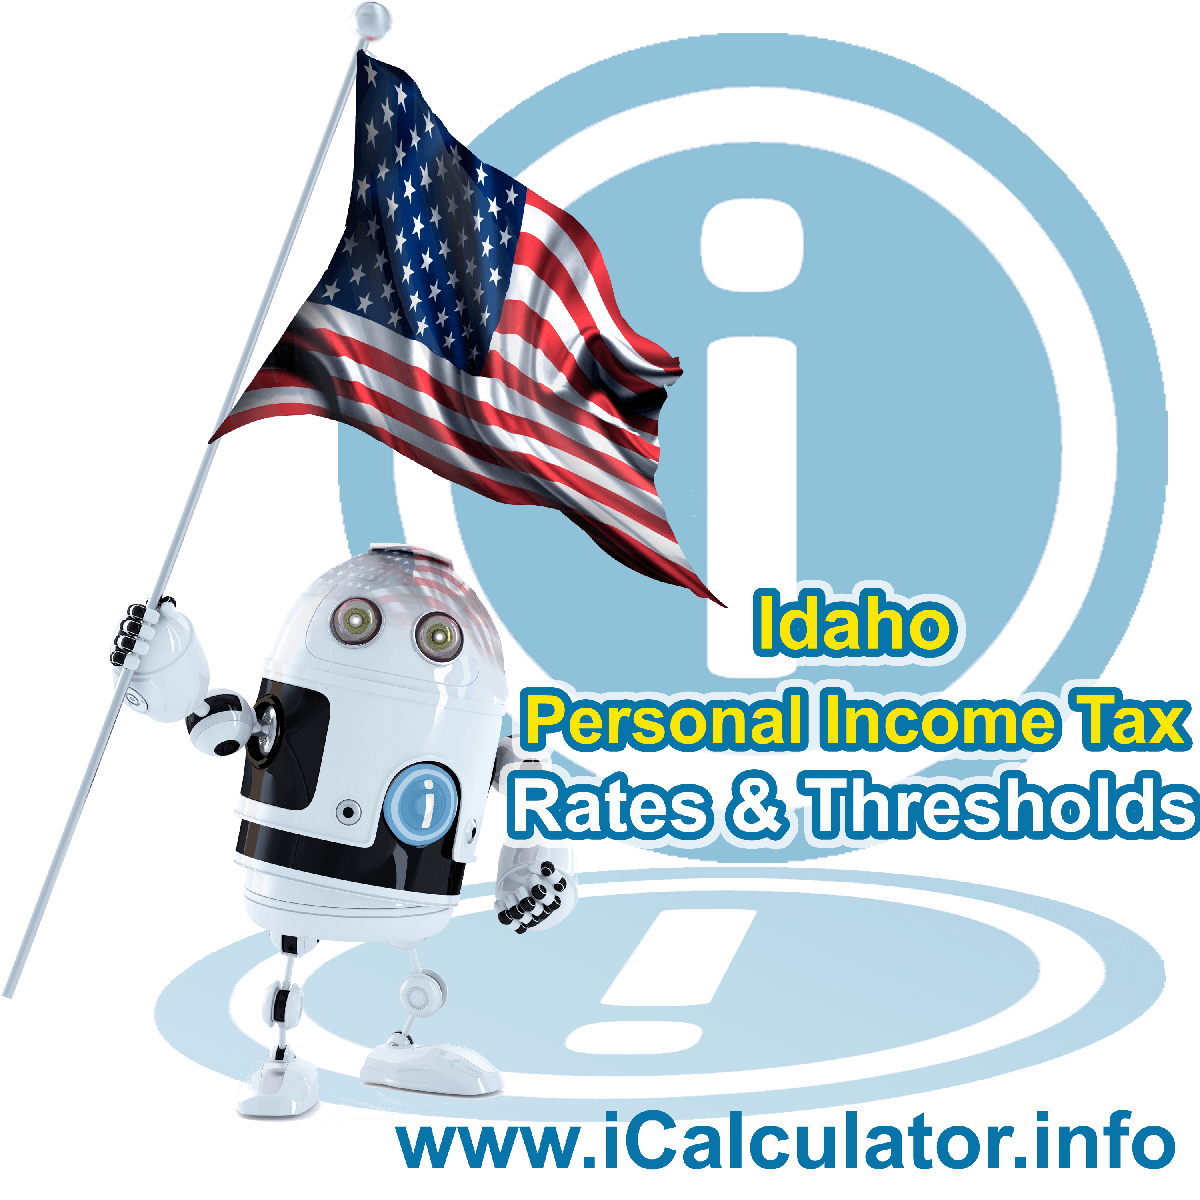 Idaho State Tax Tables 2022. This image displays details of the Idaho State Tax Tables for the 2022 tax return year which is provided in support of the 2022 US Tax Calculator